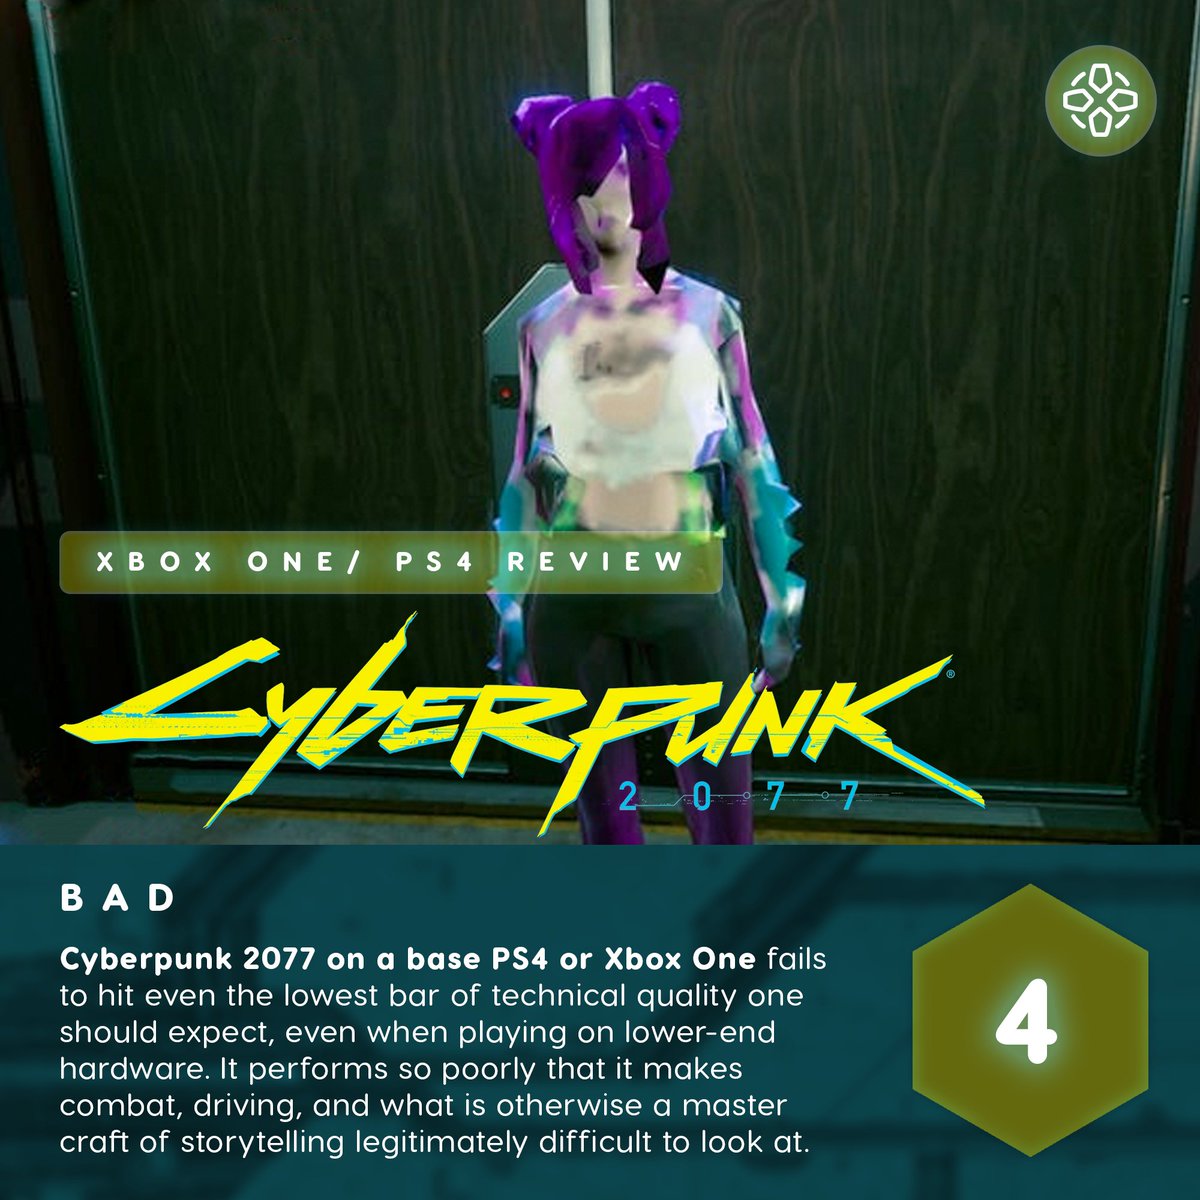 IGN on Twitter: "If your only option right now is playing Cyberpunk 2077 on the base PS4 or Xbox One, we highly suggest you don't play at all until its terrible